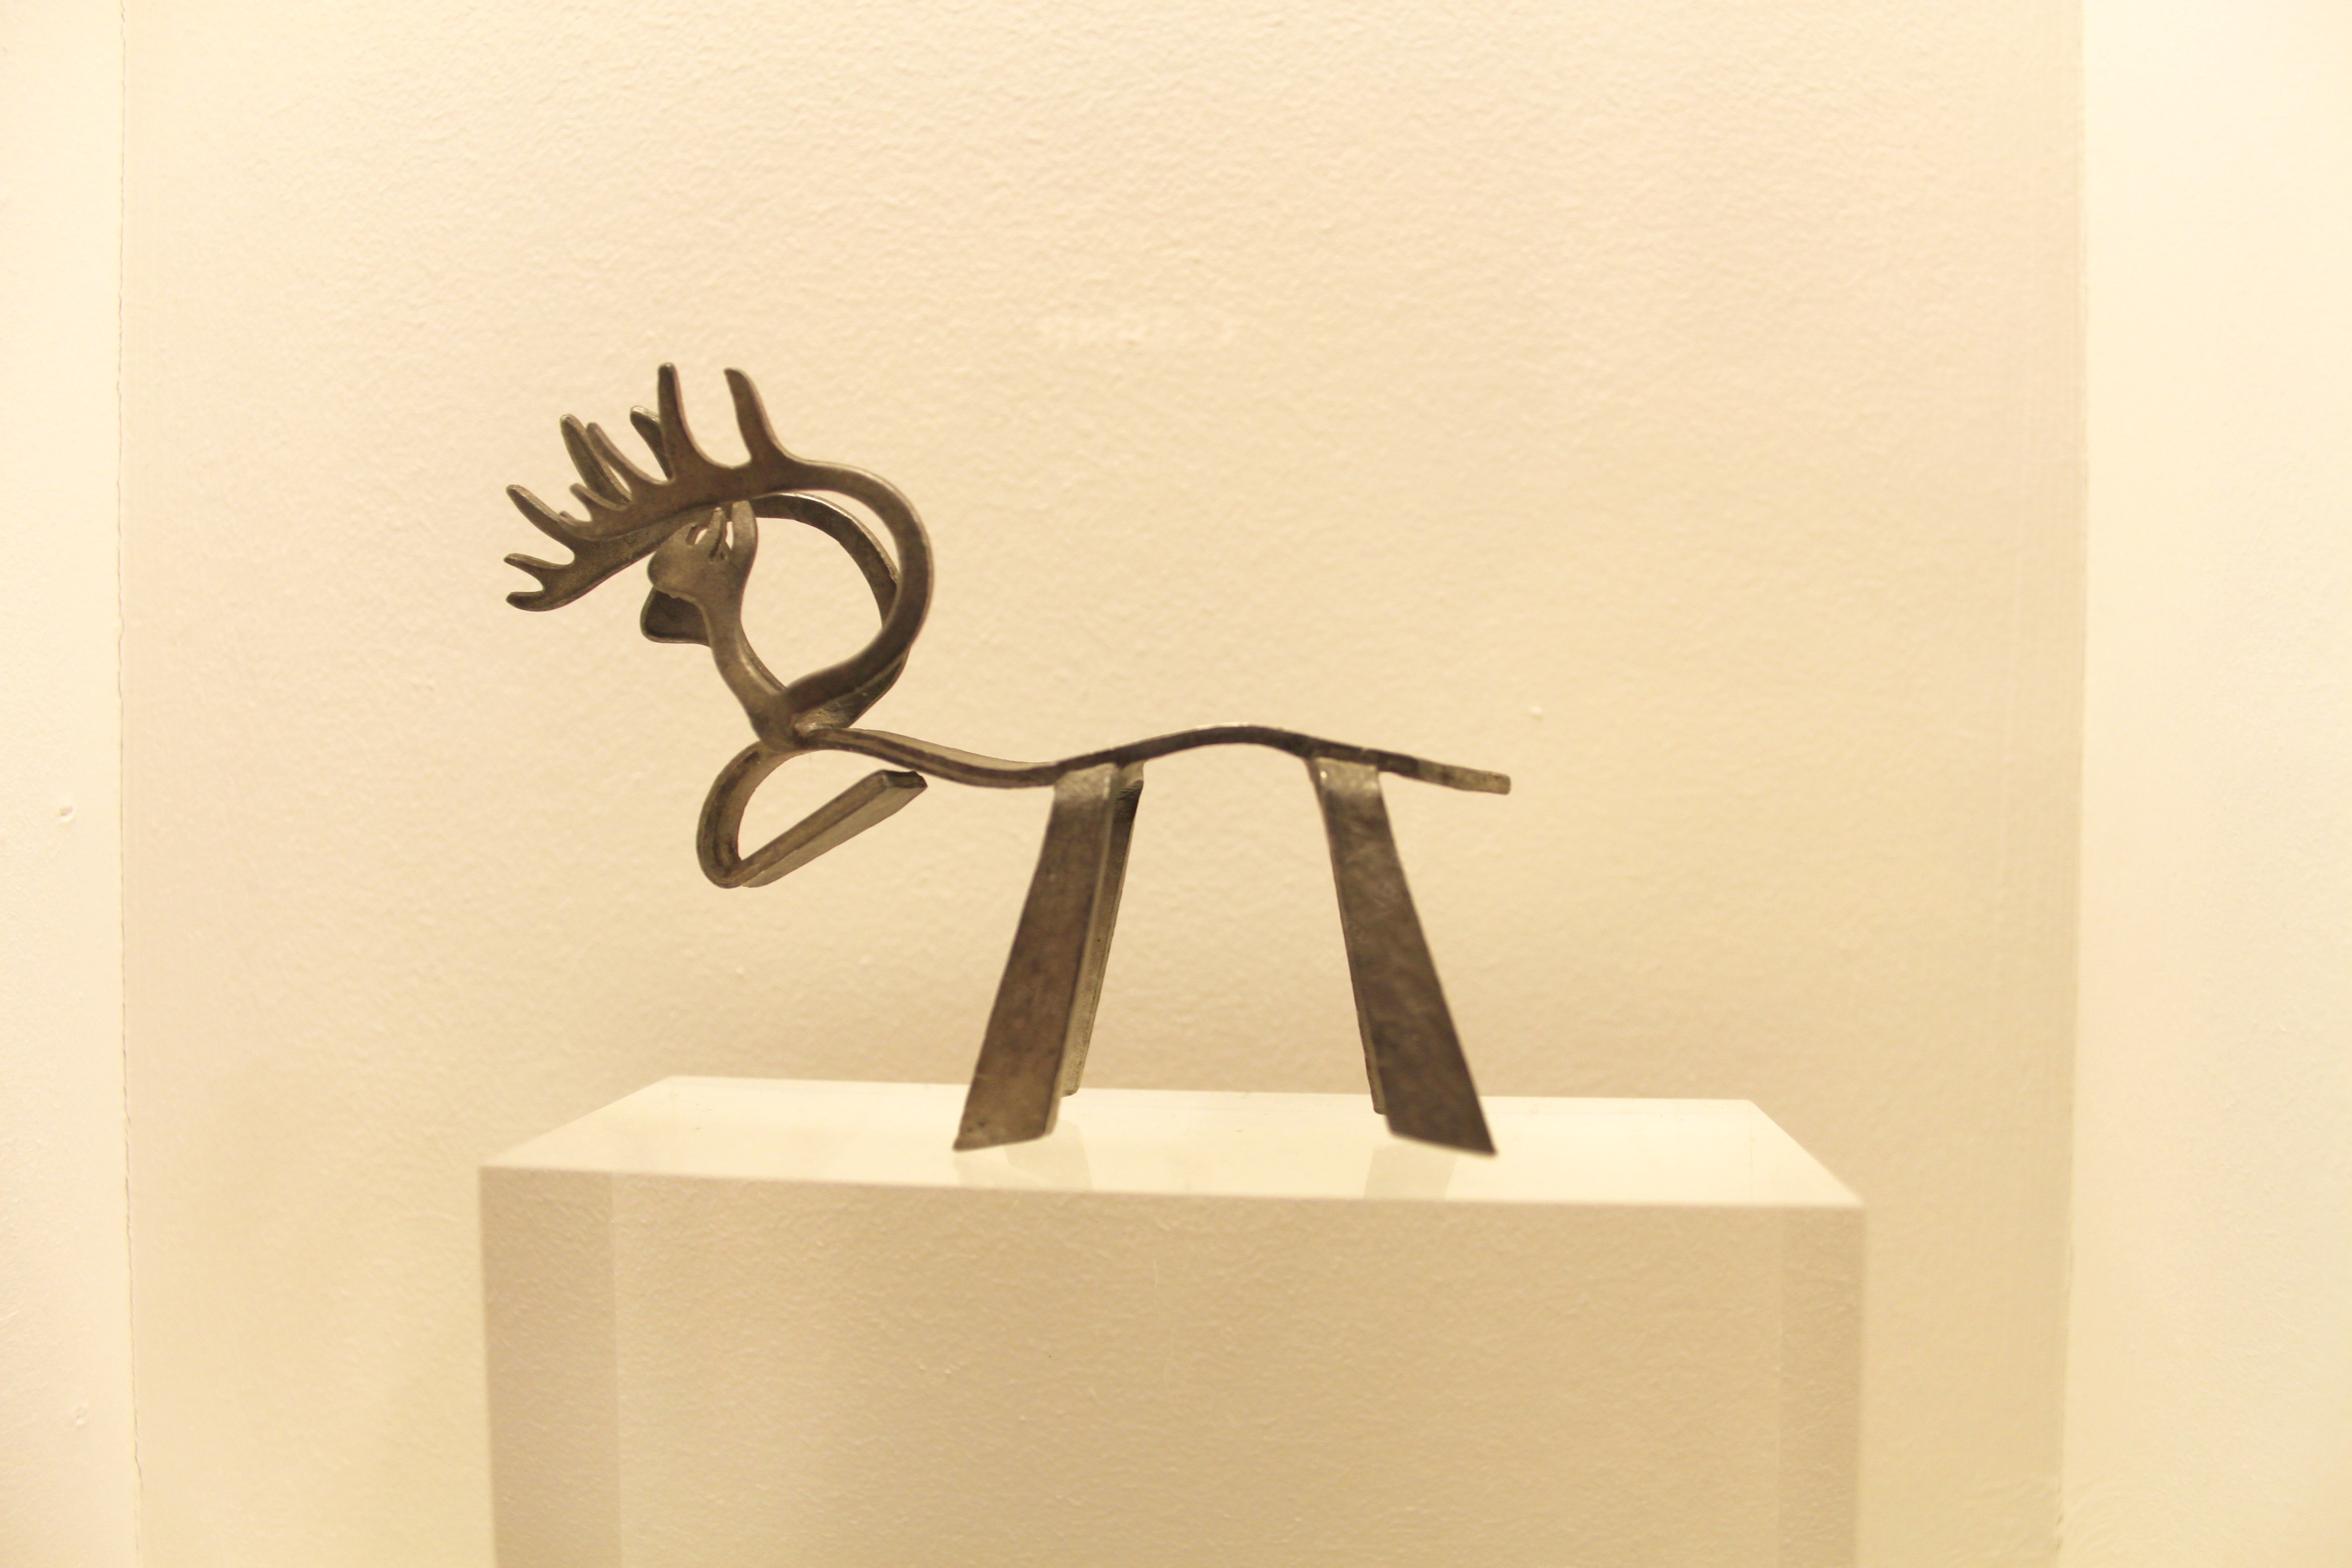 A small artistic elegant metal reindeer with a curved back and head, simple legs and intricate antlers  on a small off-white podium with an off-white wall behind.